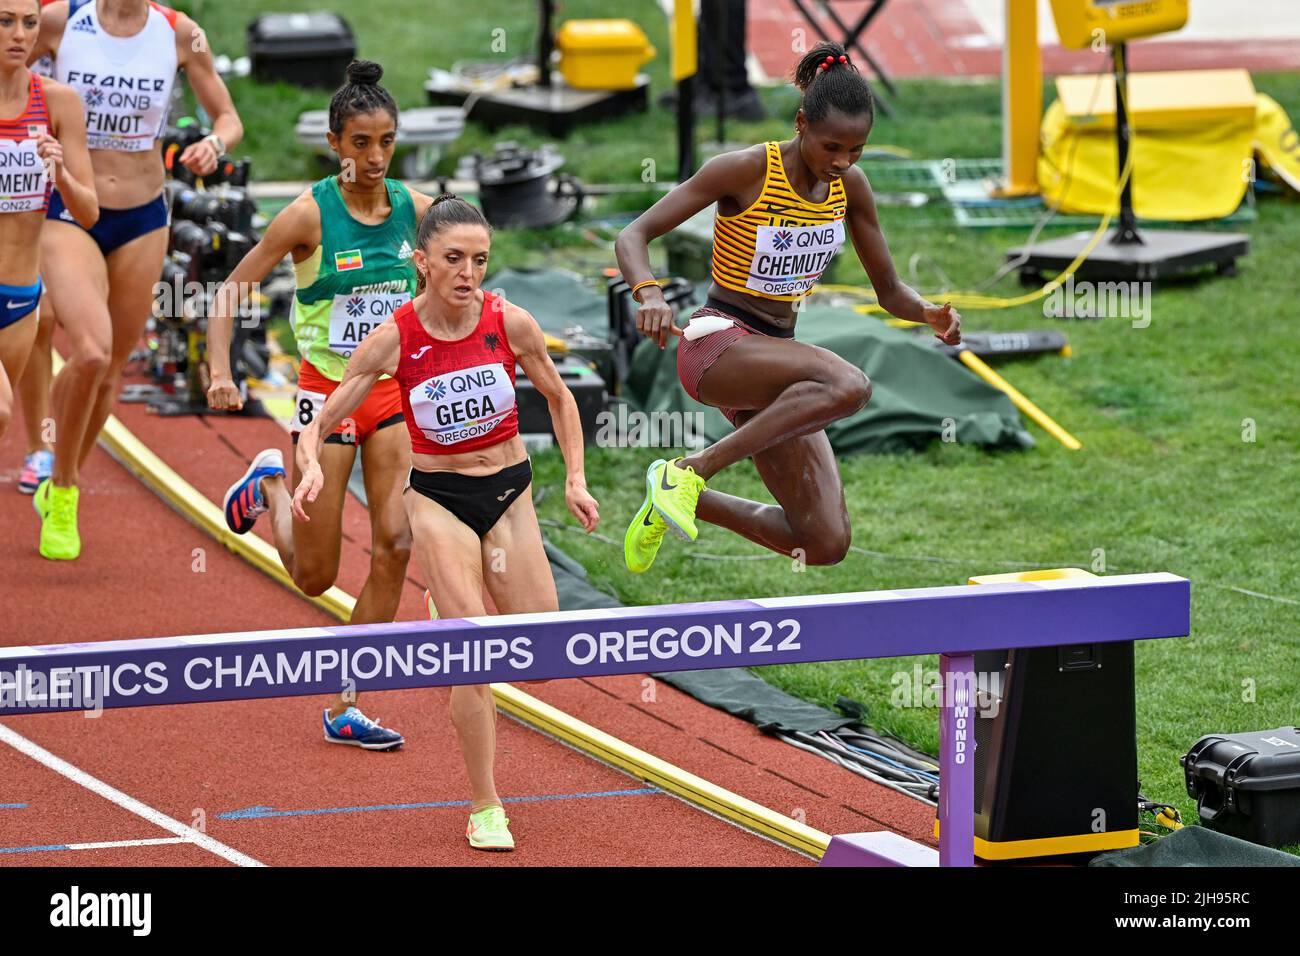 EUGENE, UNITED STATES - JULY 16: Luiza Gega of Albania, Peruth Chemutai of Uganda competing on Women's 3000 metres Steeplechase during the World Athletics Championships on July 16, 2022 in Eugene, United States (Photo by Andy Astfalck/BSR Agency) Stock Photo